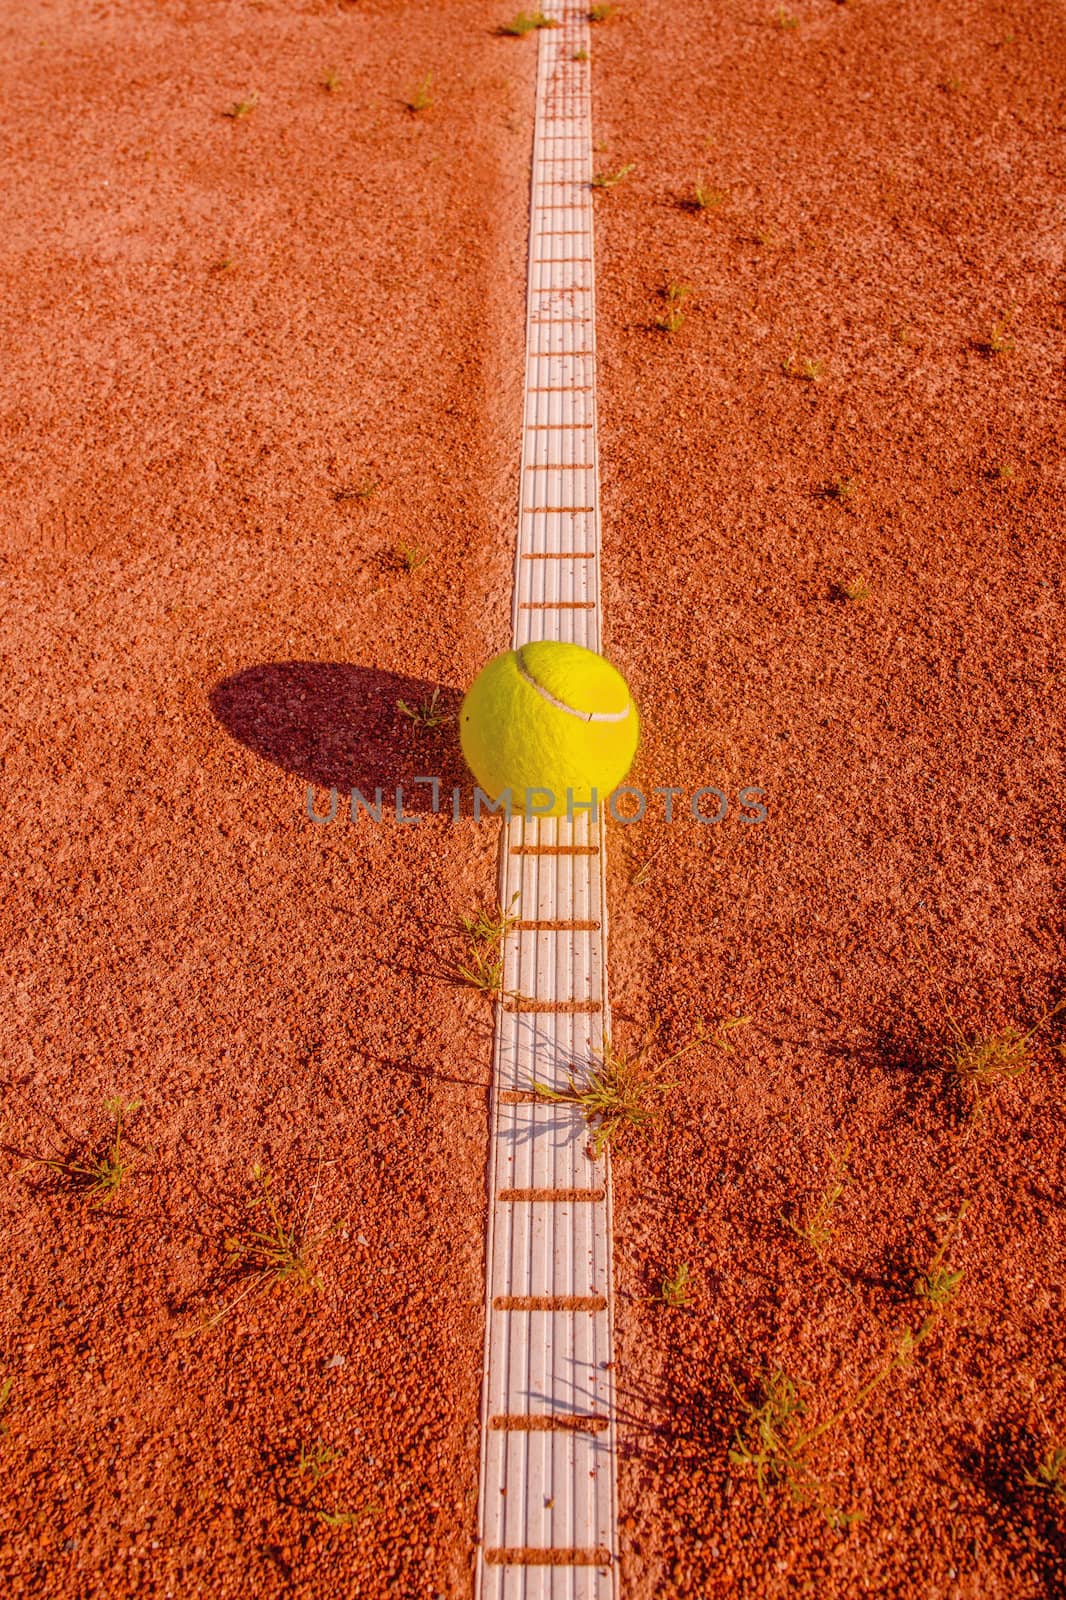 Yellow tennisball on a old court by Sportactive